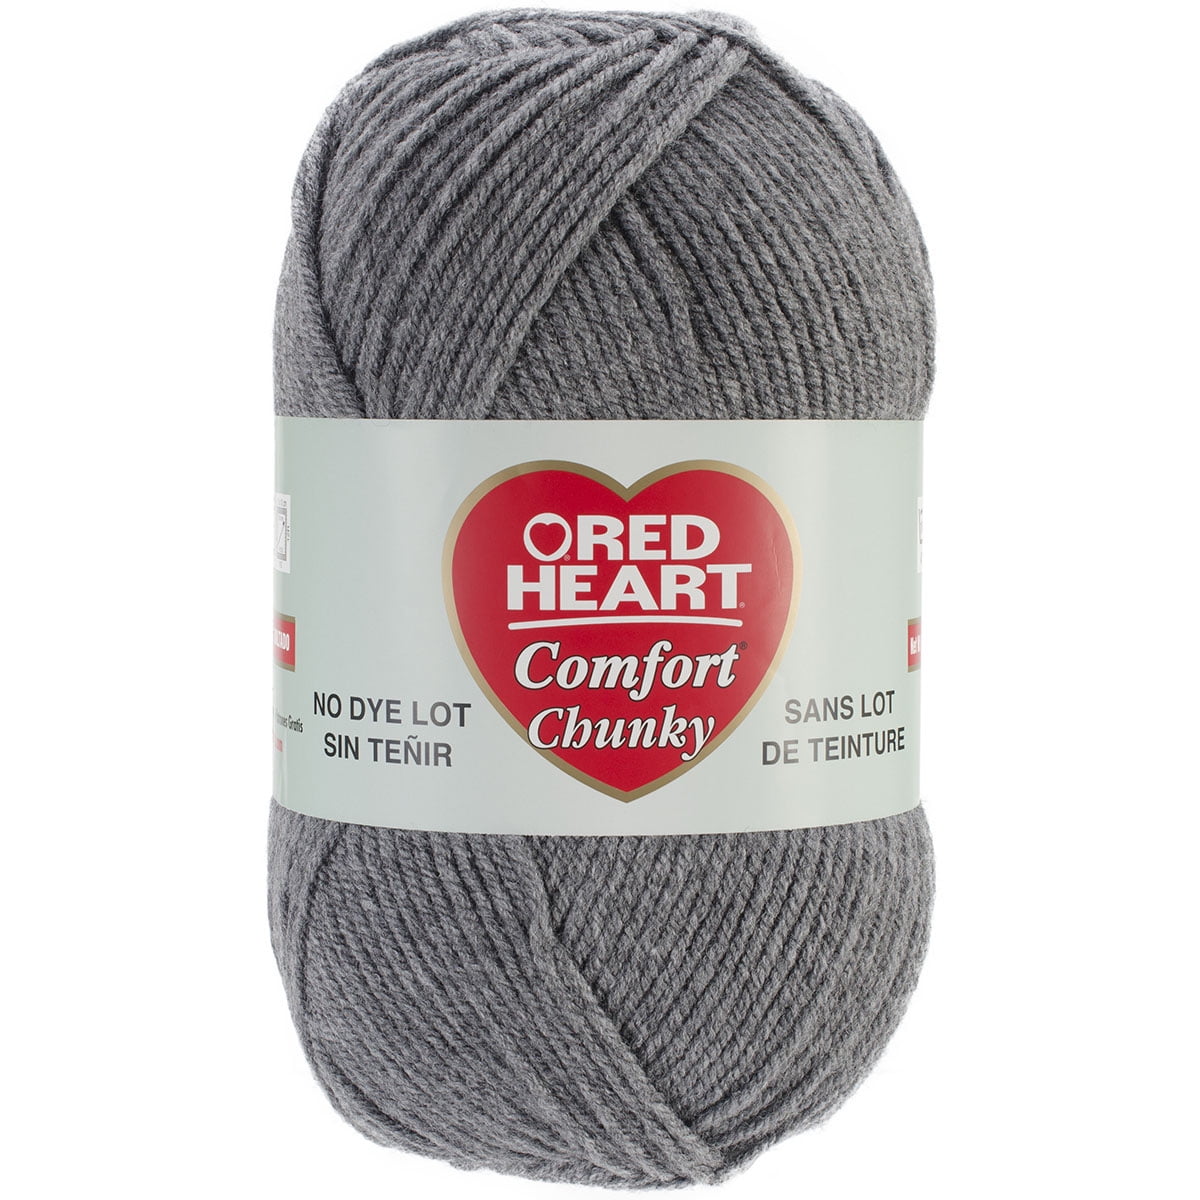 Red Heart Comfort Chunky Yarn - Discontinued shades